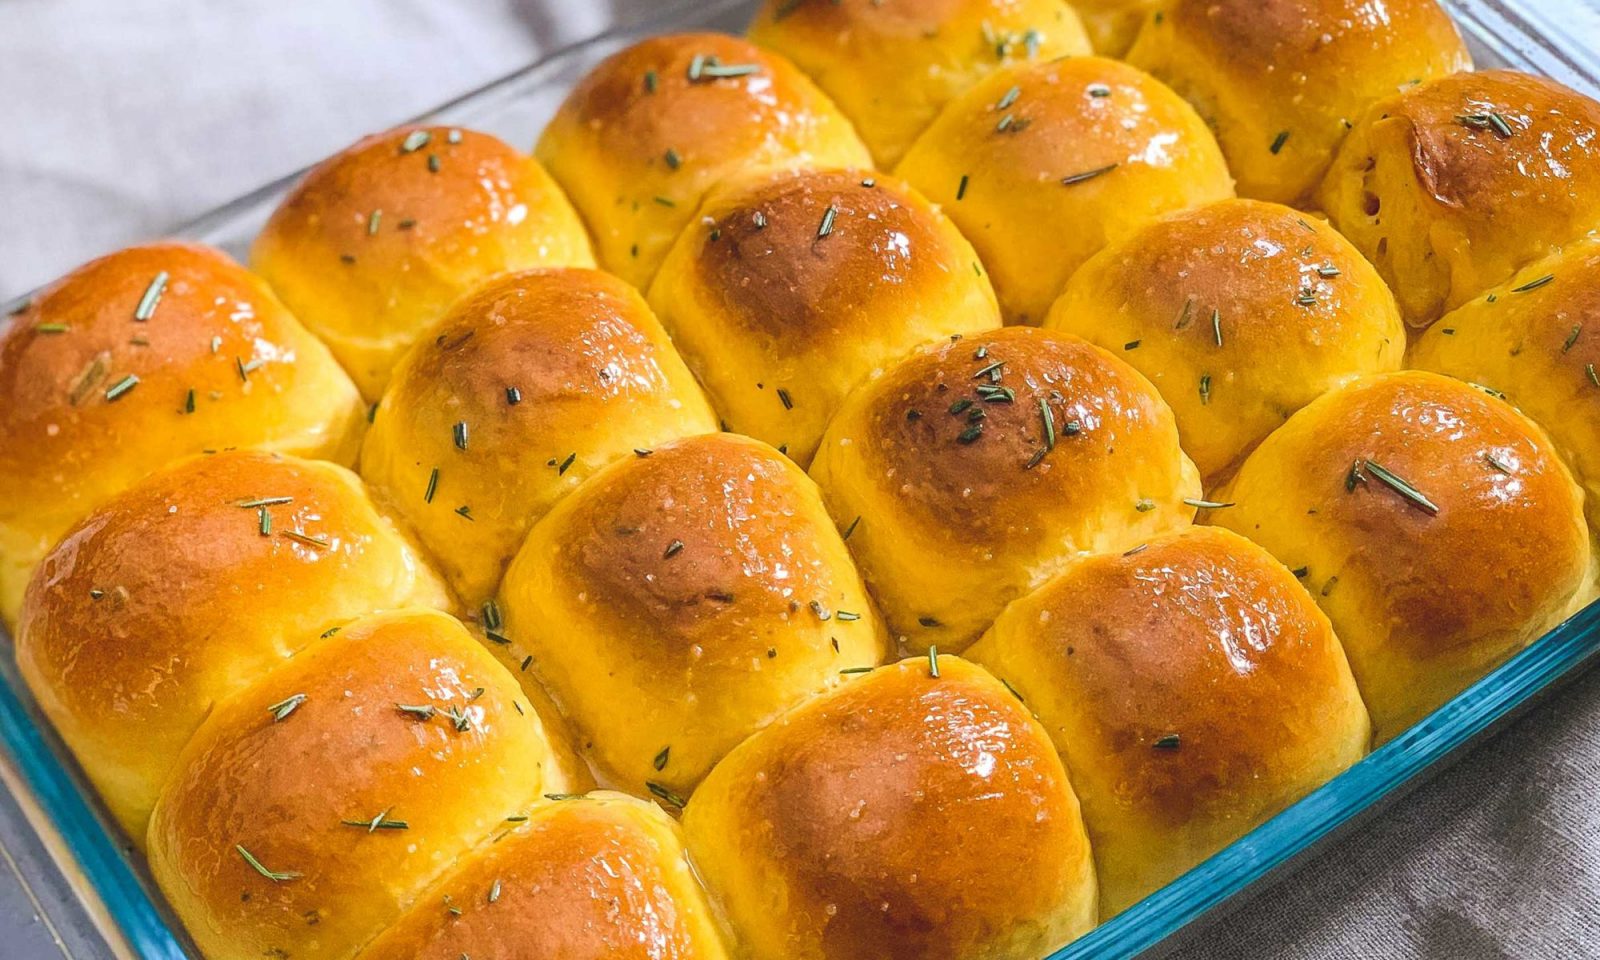 🥐 Can We Guess Your Age and Gender Based on the Pastries You’ve Eaten? Sweet Potato Rolls